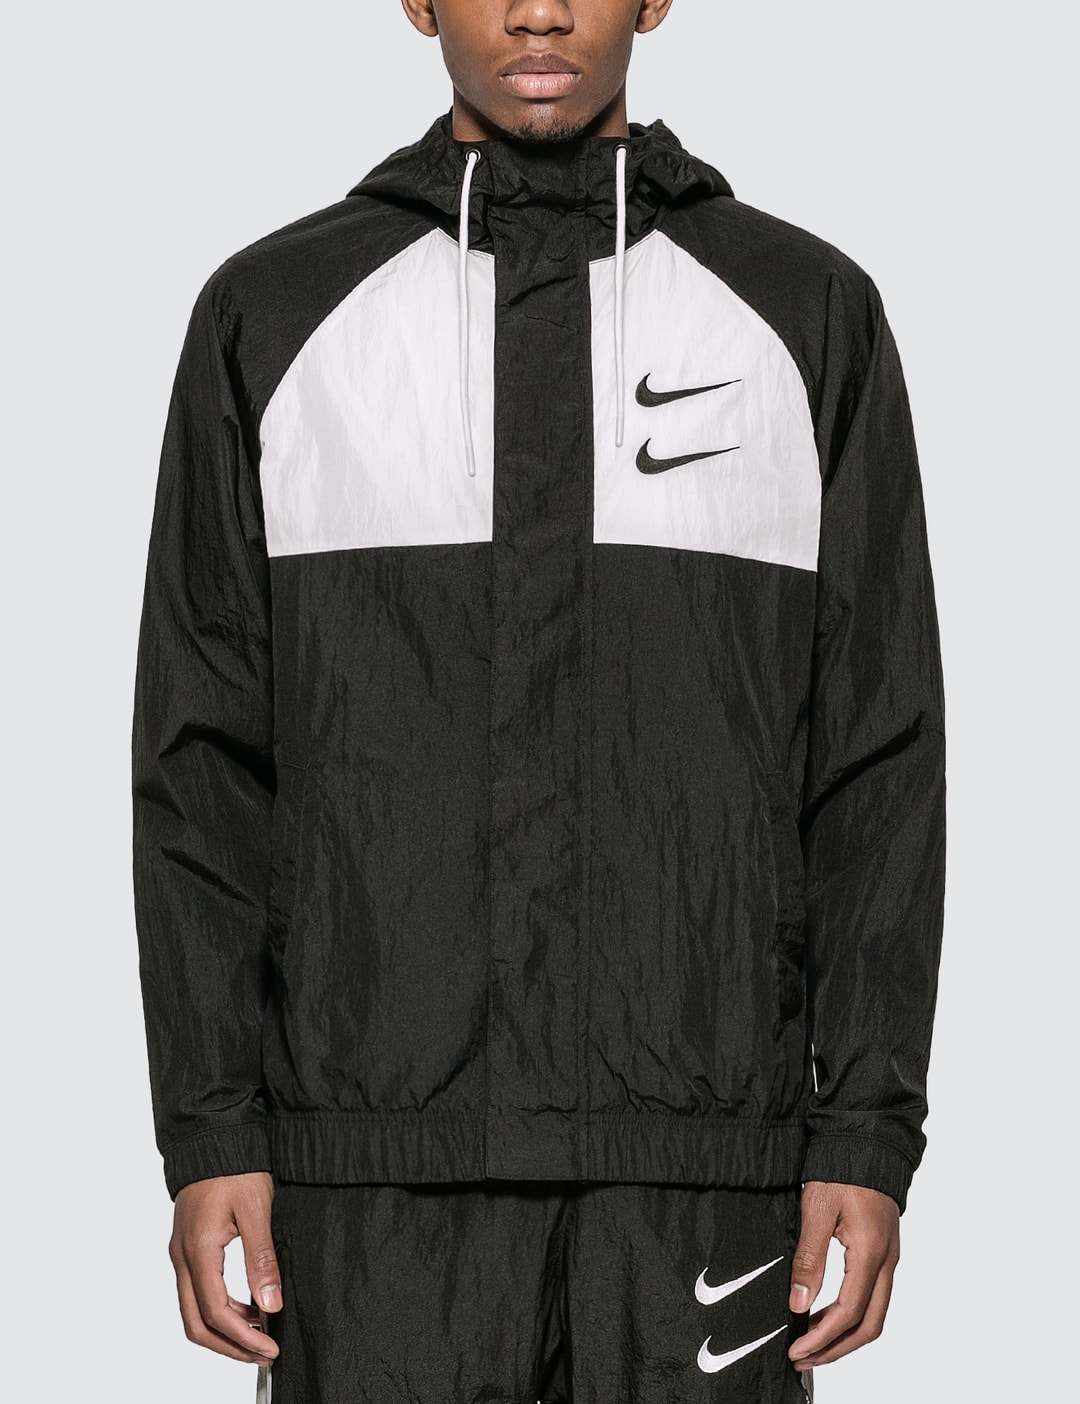 Nike - Sportswear Swoosh Woven Jacket | HBX - Globally Curated Fashion and Lifestyle by Hypebeast